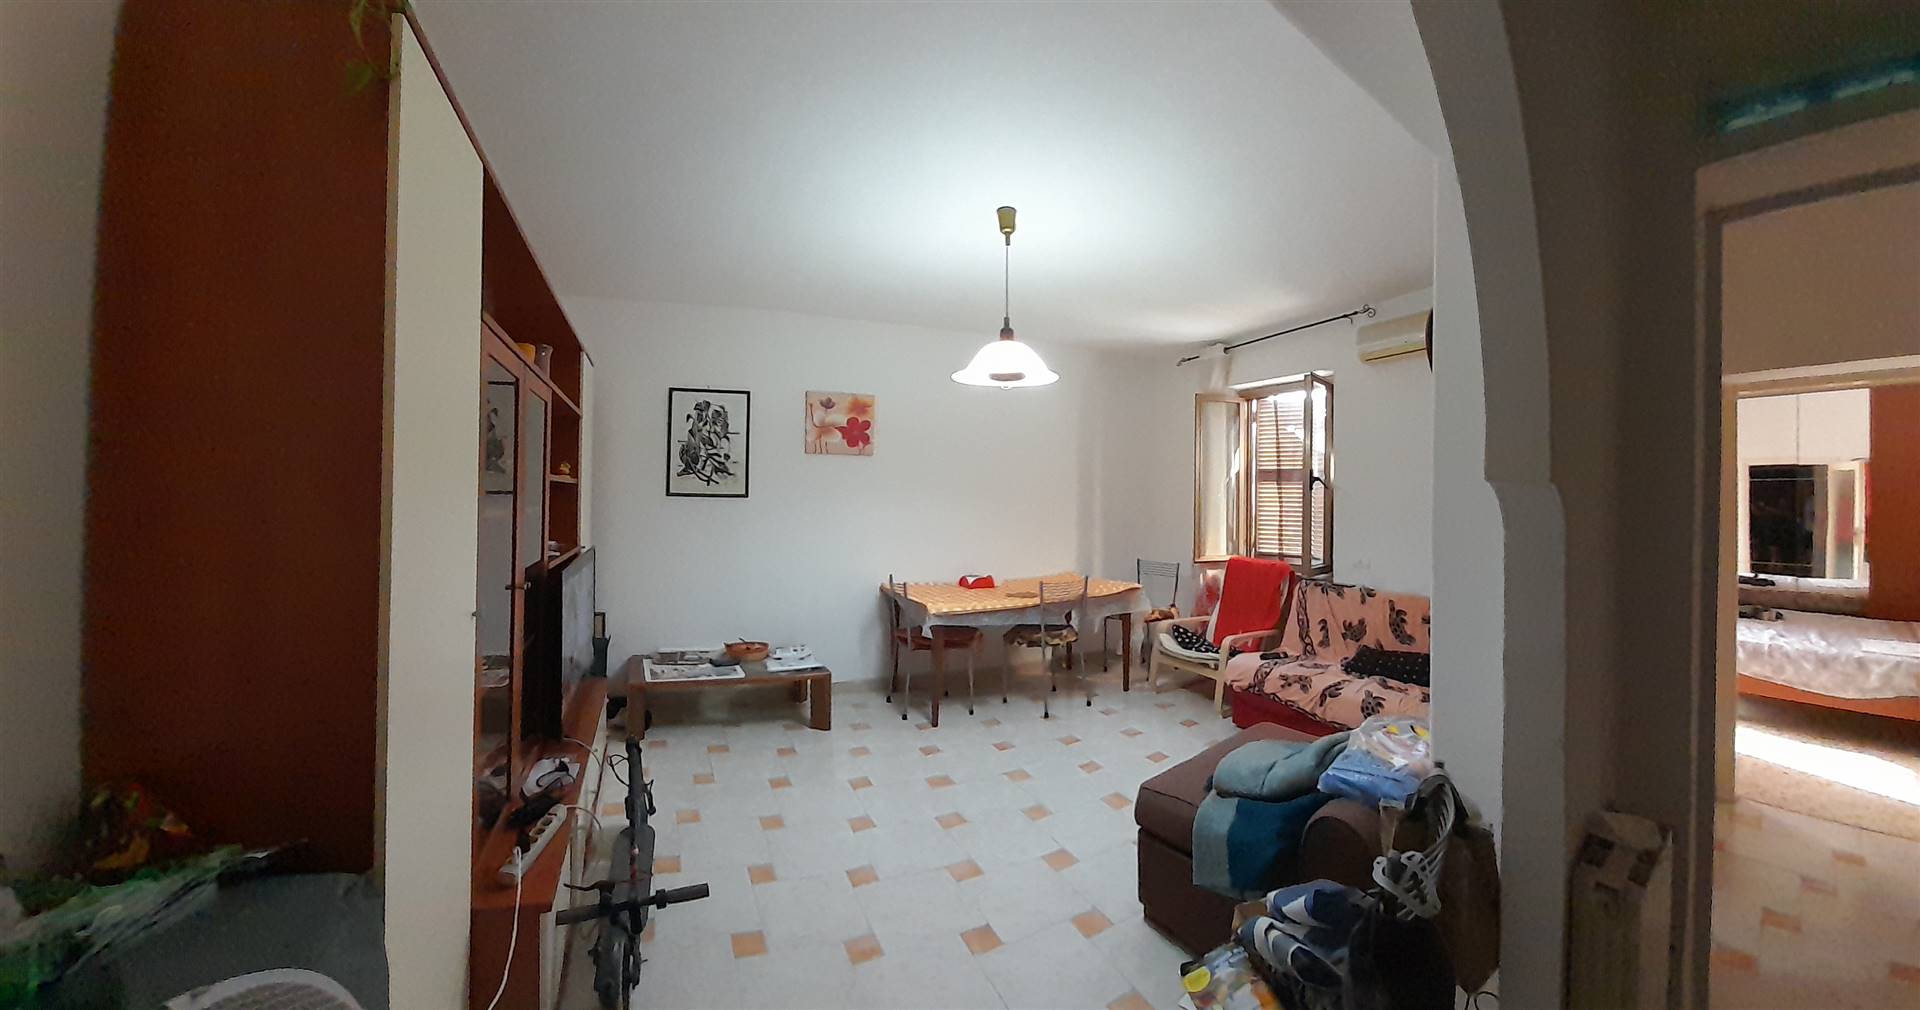 CENTRO, CIVITAVECCHIA, Apartment for sale of 60 Sq. mt., Habitable, Heating Individual heating system, Energetic class: G, placed at 1° on 2, composed by: 2 Rooms, Kitchenette, , 1 Bedroom, 1 